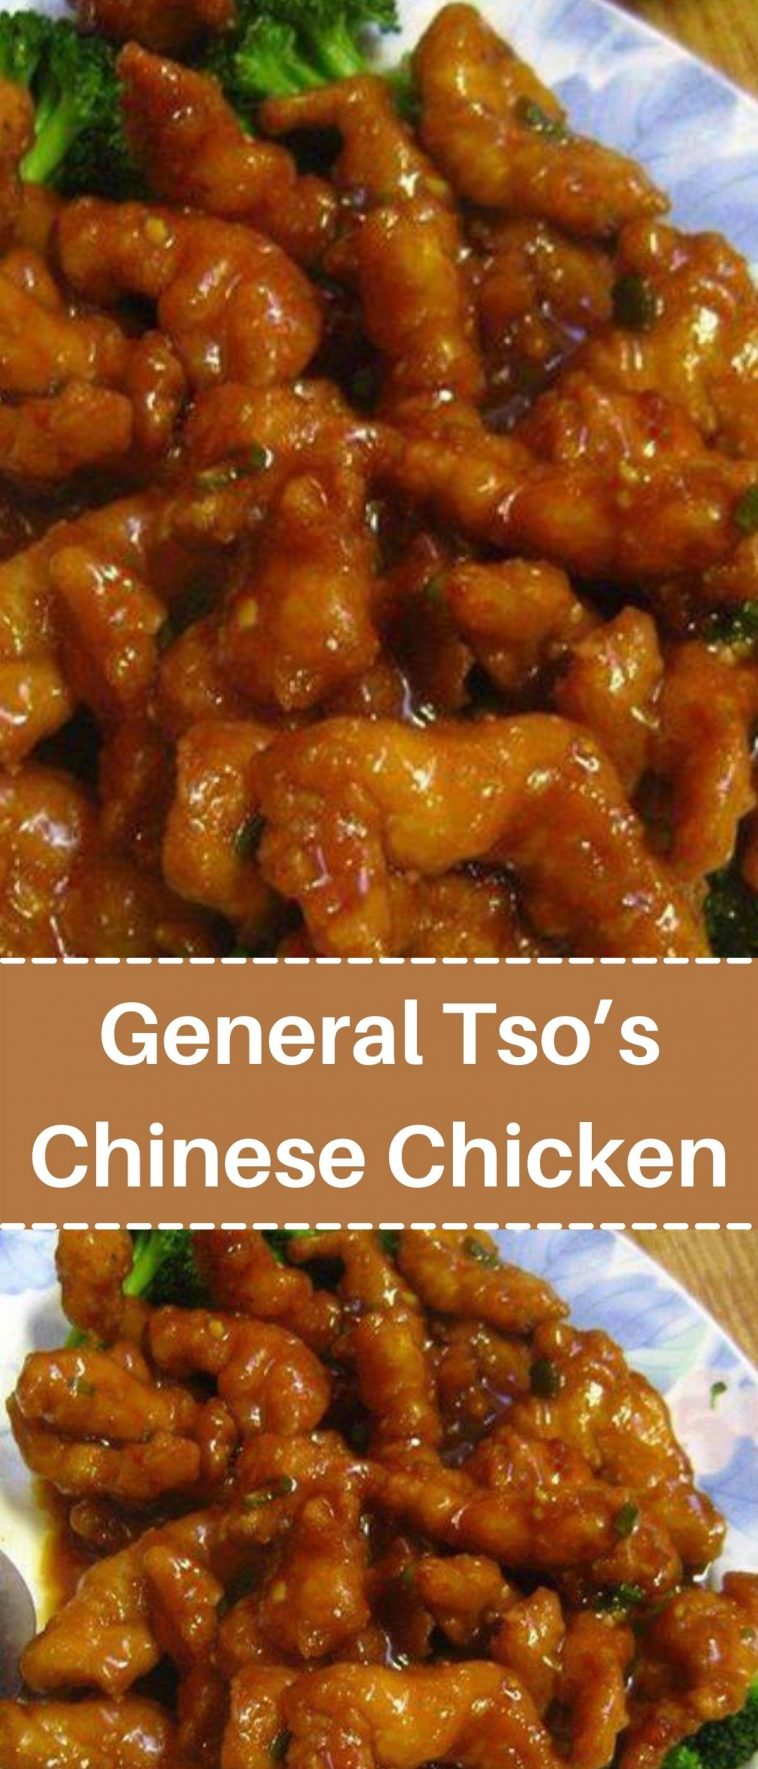 General Tso’s Chinese Chicken